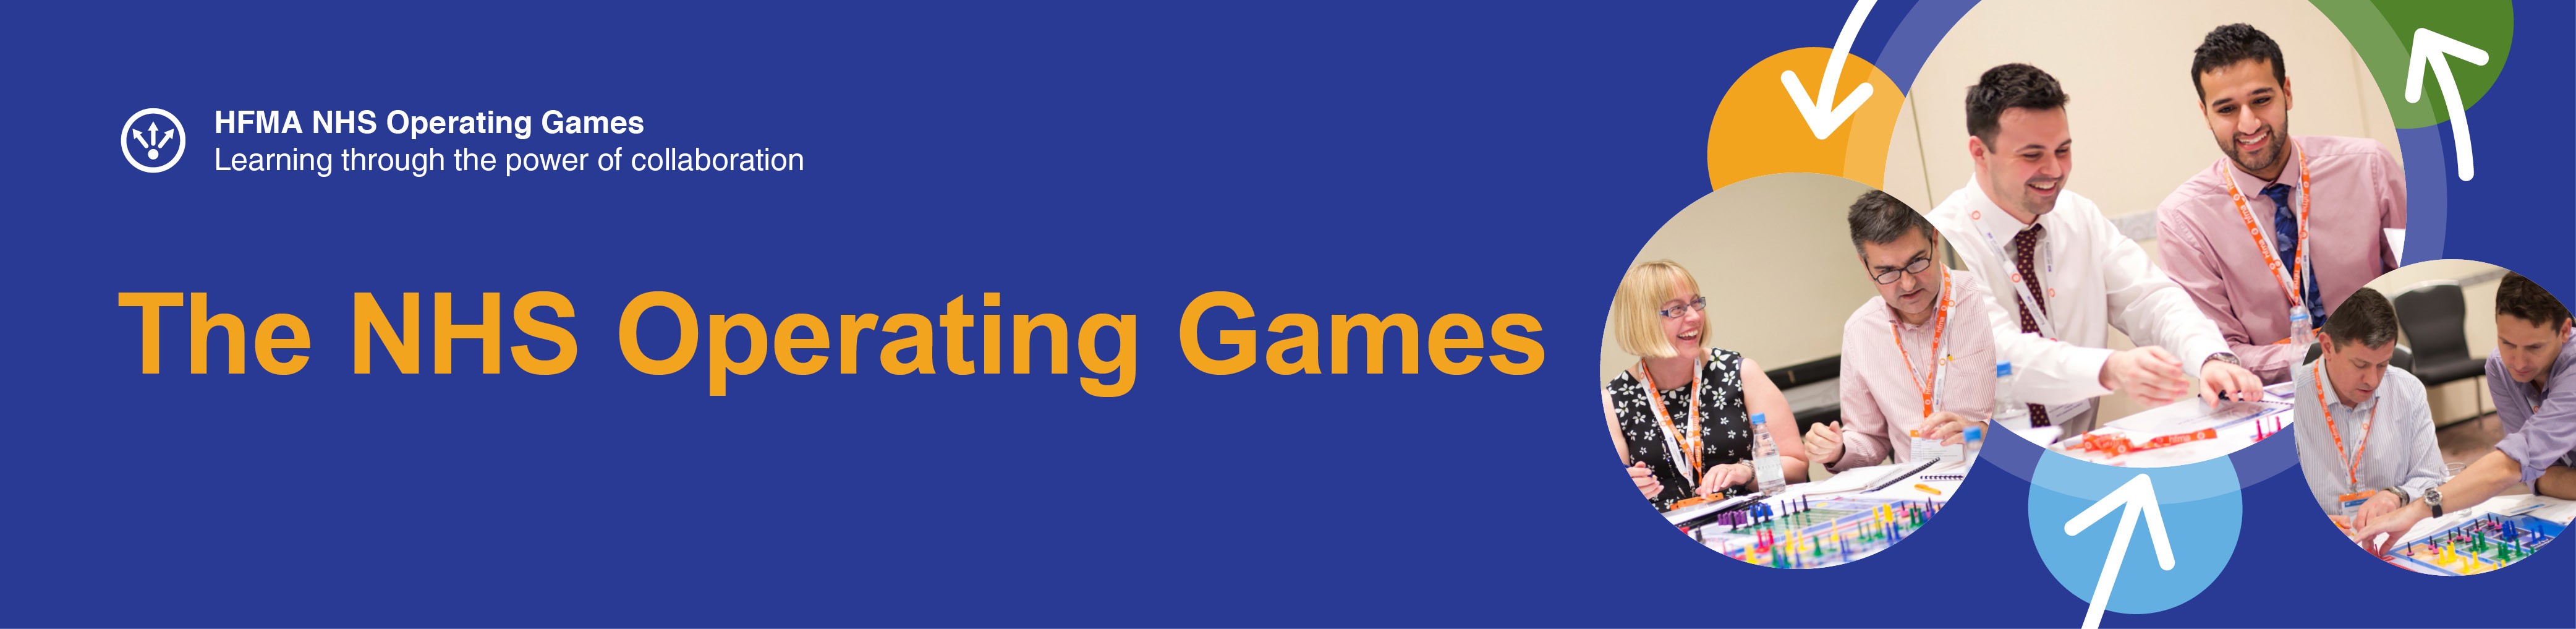 NHS Operating Games banner